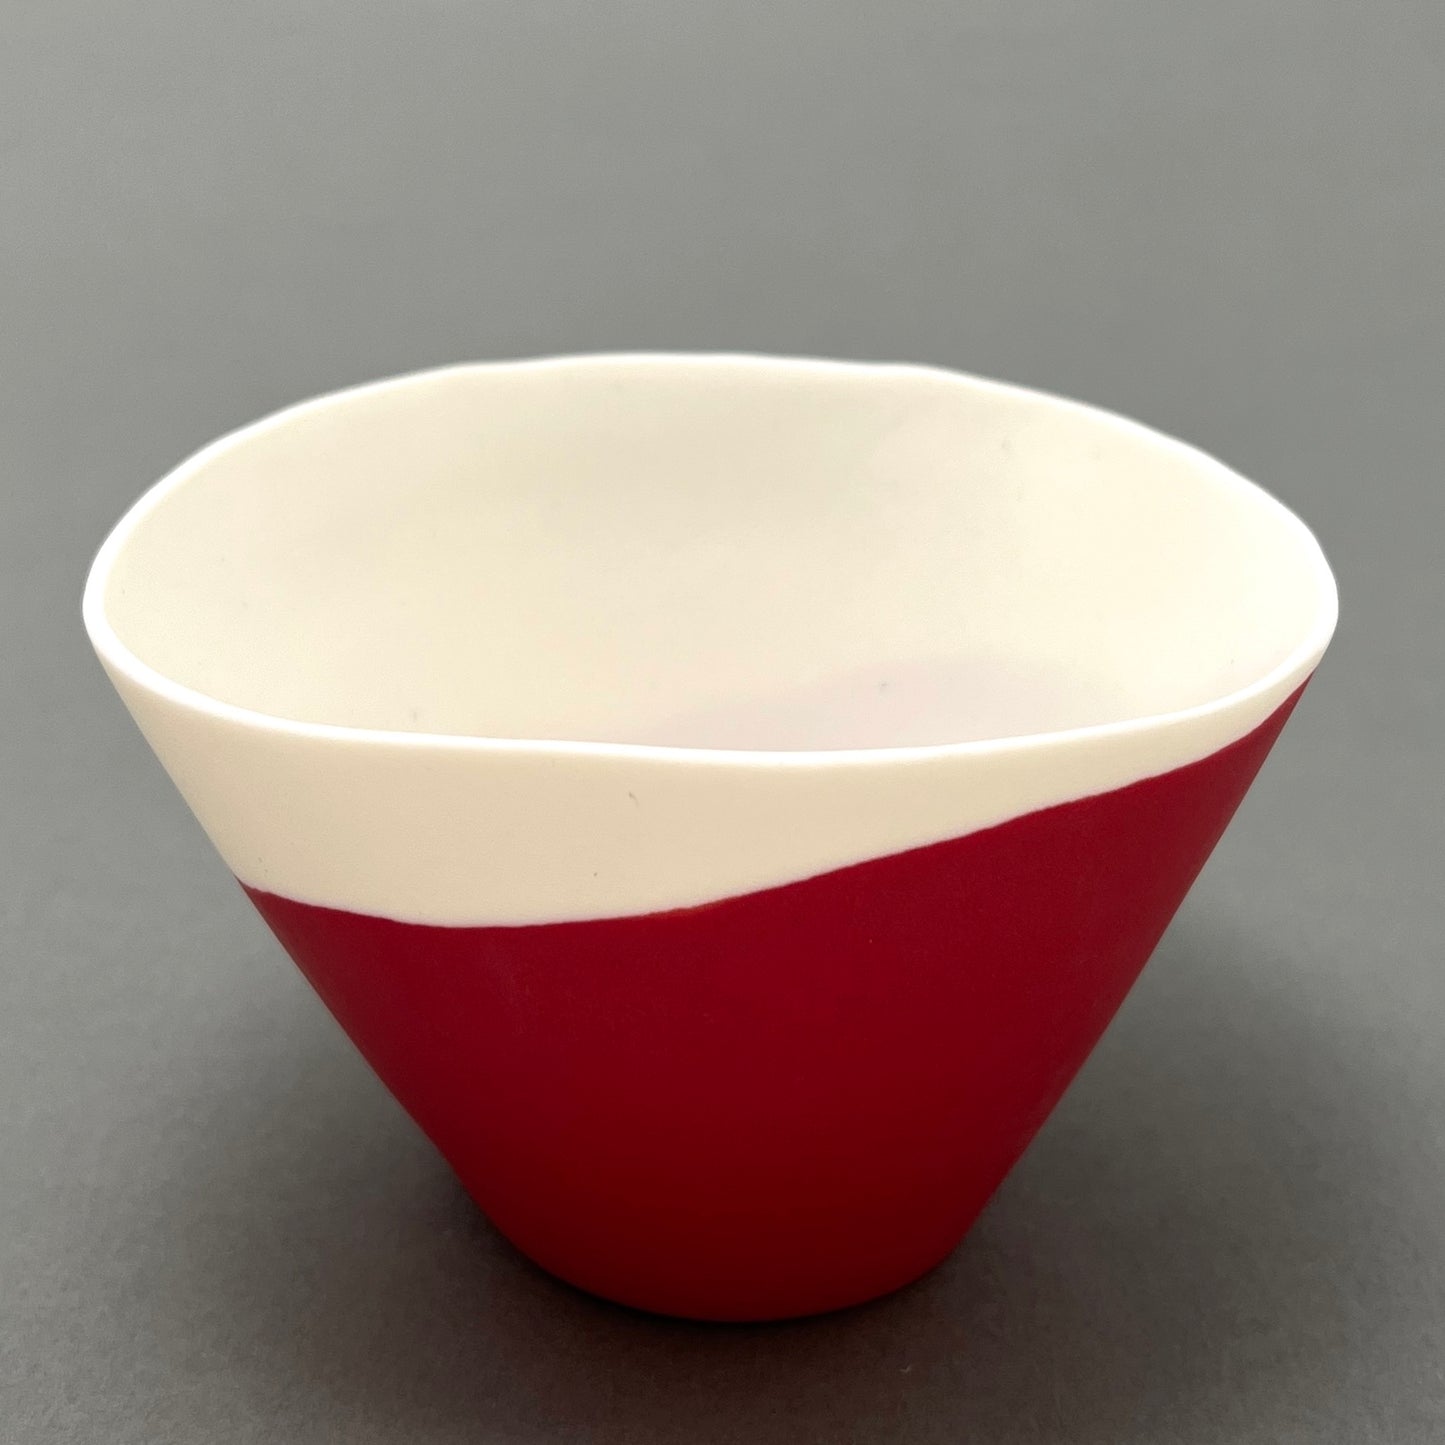 A white and red coloured porcelain bowl standing on a gray background